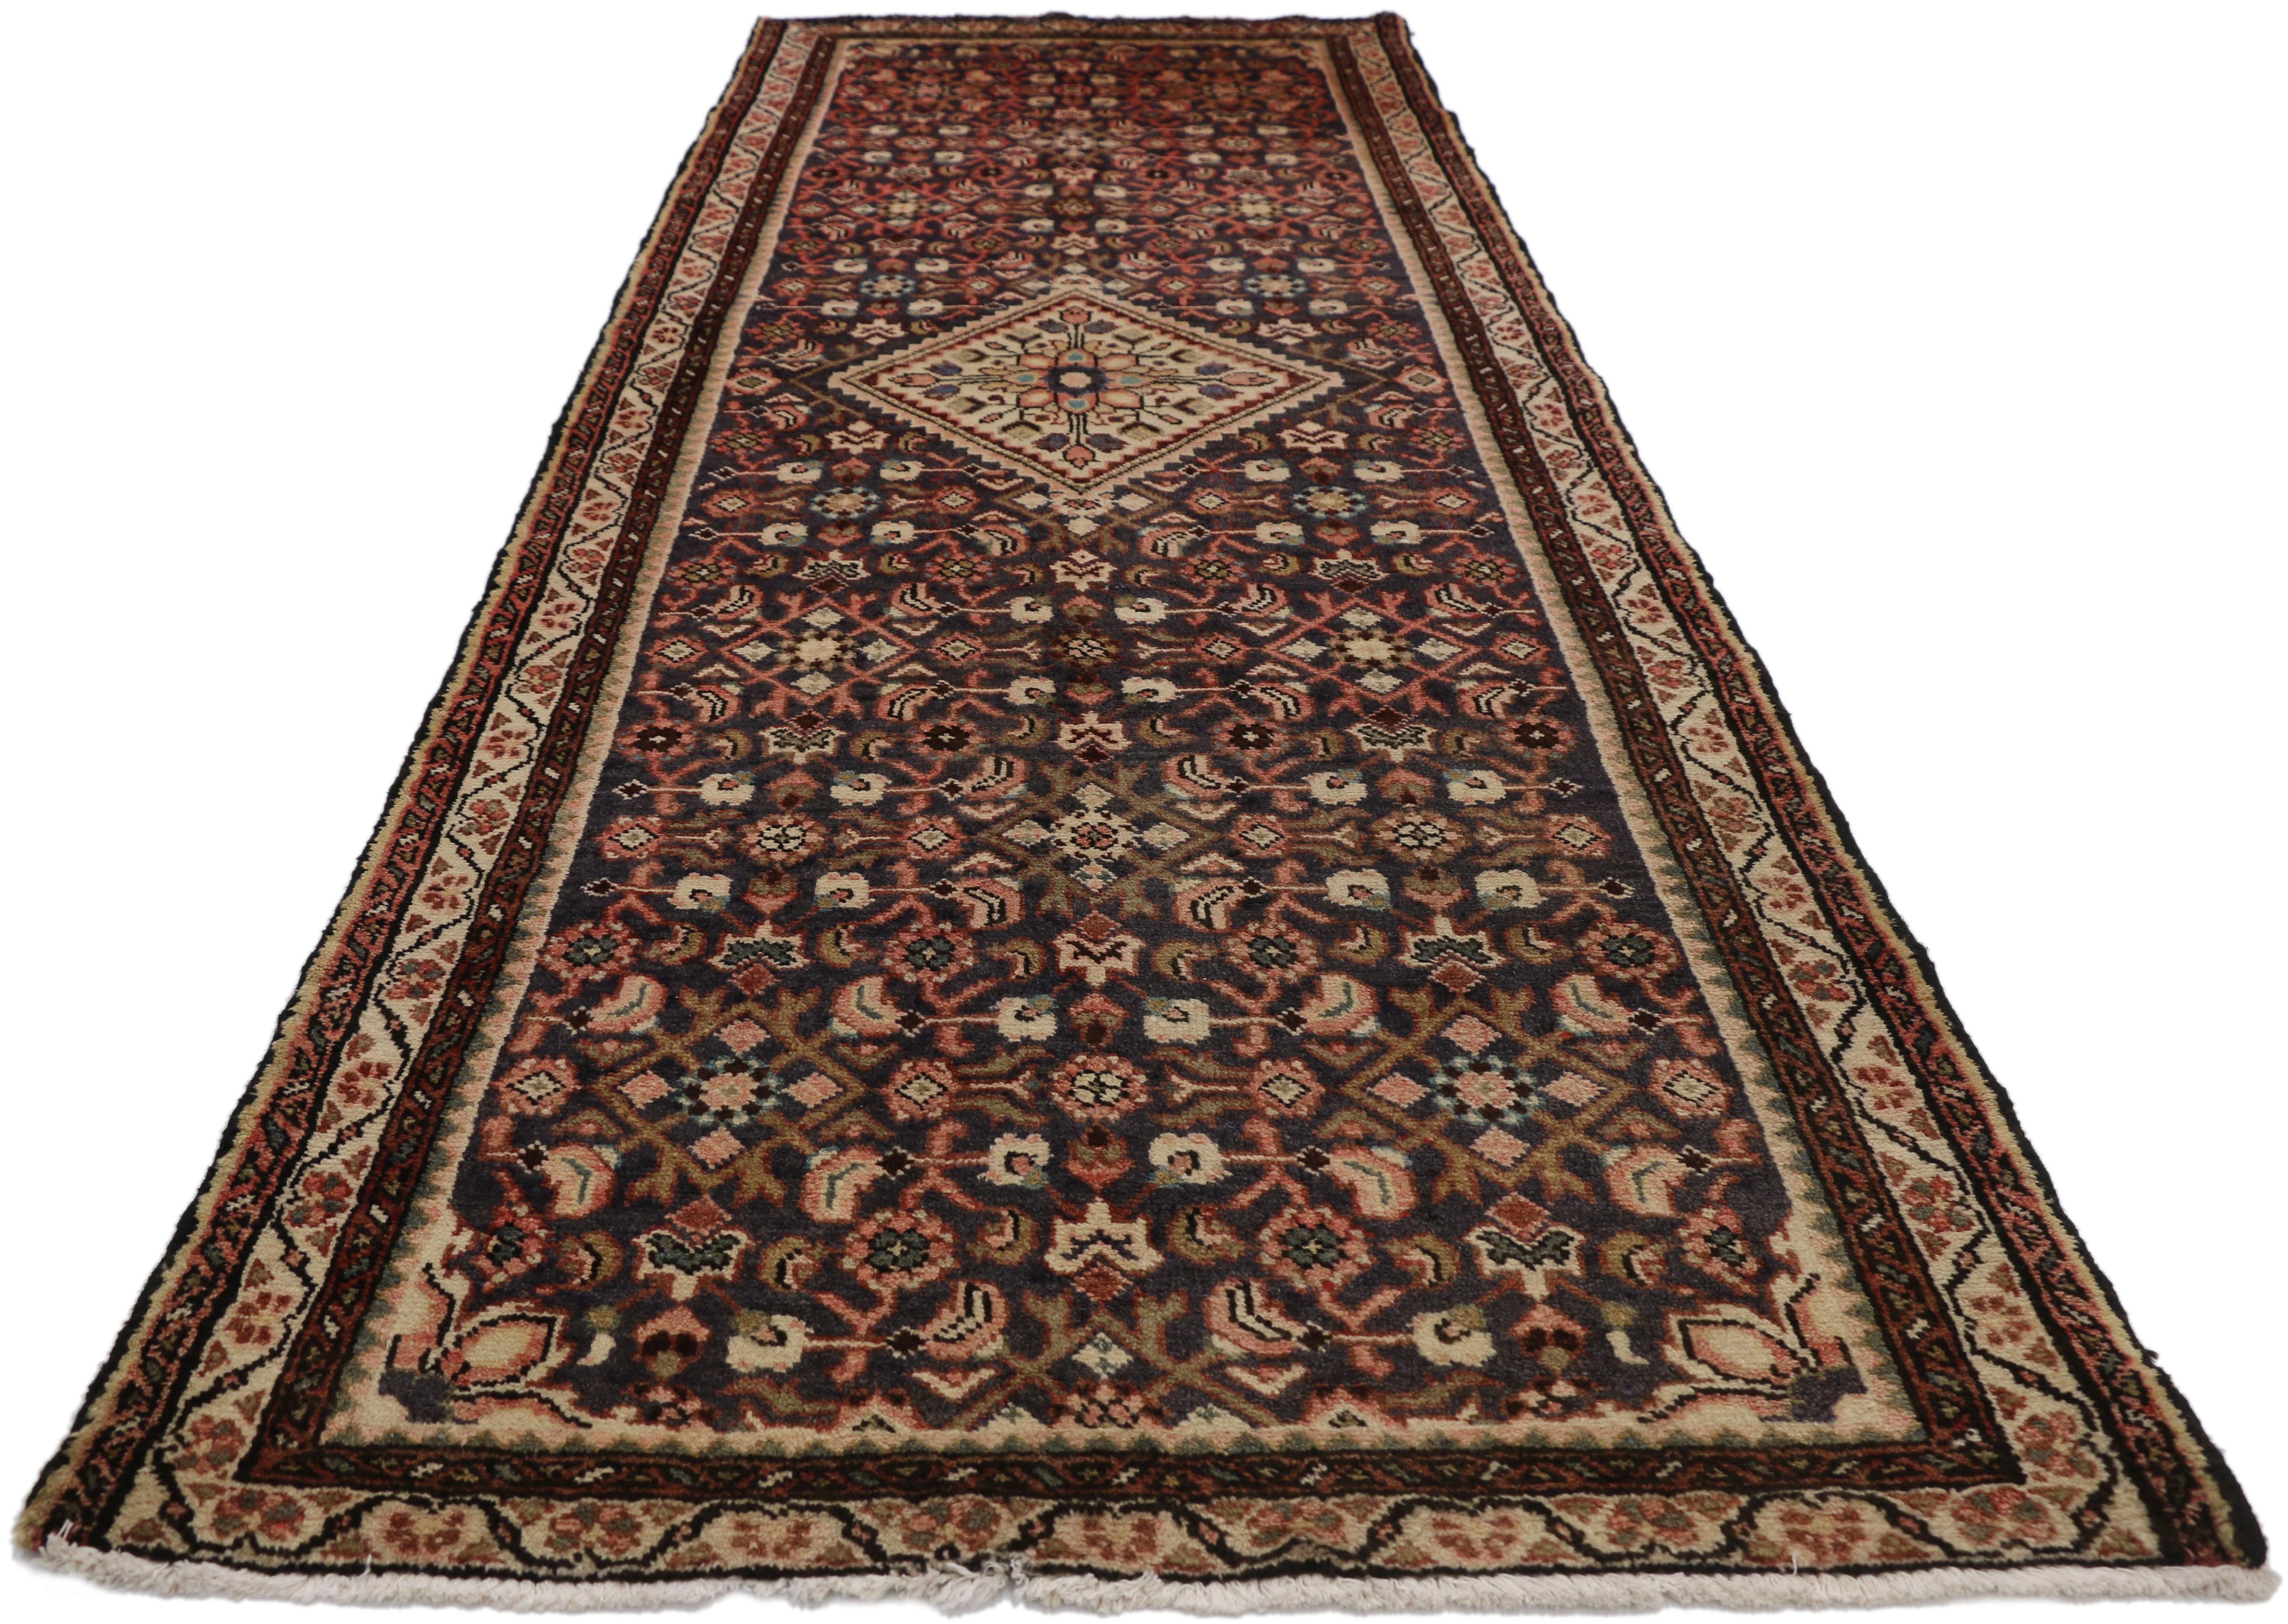 Arts and Crafts Vintage Persian Hamadan Hallway Runner with Rustic Arts & Crafts Style For Sale